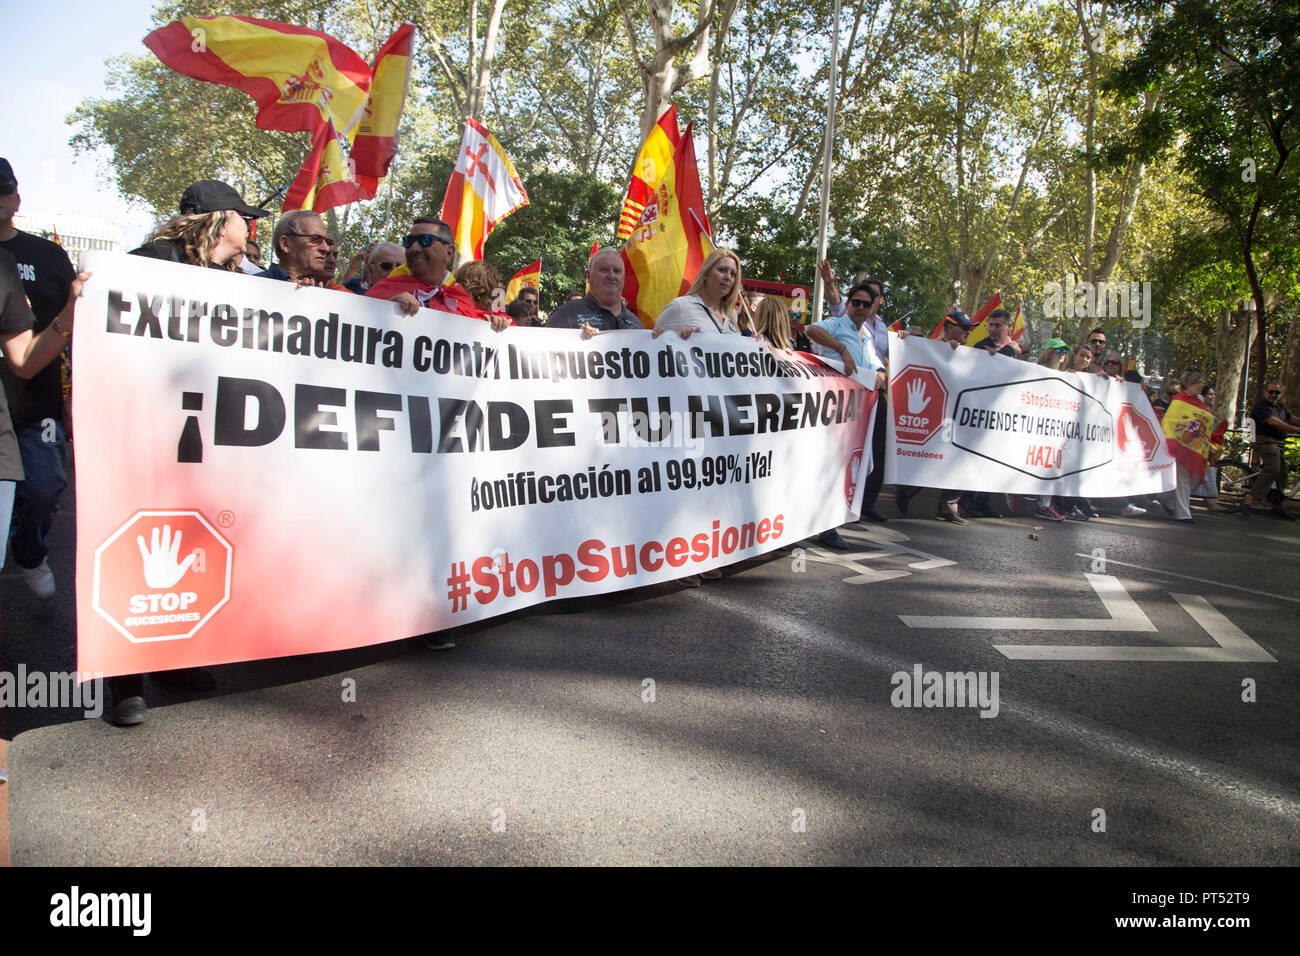 October 6, 2018 - Madrid, Spain - Protesters are seen holding banner and flags during the protest..Millions of people with Spanish constitutional and Falangist flags demonstrated in Madrid against the Spanish government of Pedro Sanchez, for the unity of the country and against the inheritance tax. The demonstration stated at the Plaza de ColÃ³n to the Congress of Deputies. (Credit Image: © Lito Lizana/SOPA Images via ZUMA Wire) Stock Photo